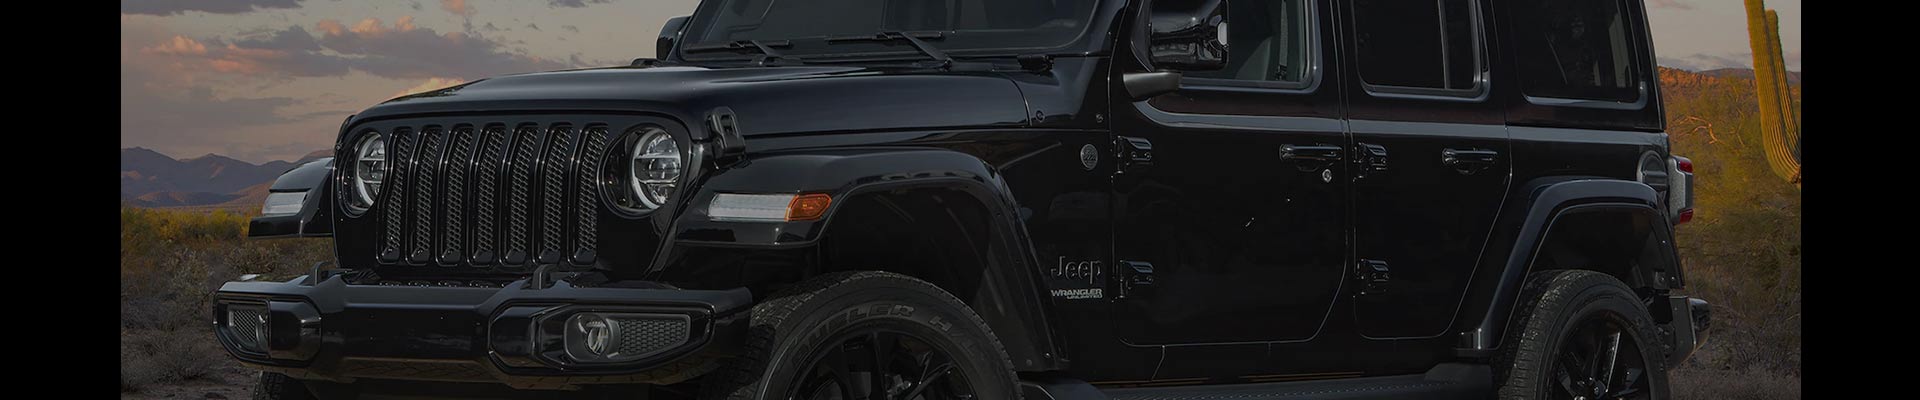 Shop Replacement and OEM 1997 Jeep Wrangler Parts with Discounted Price on the Net